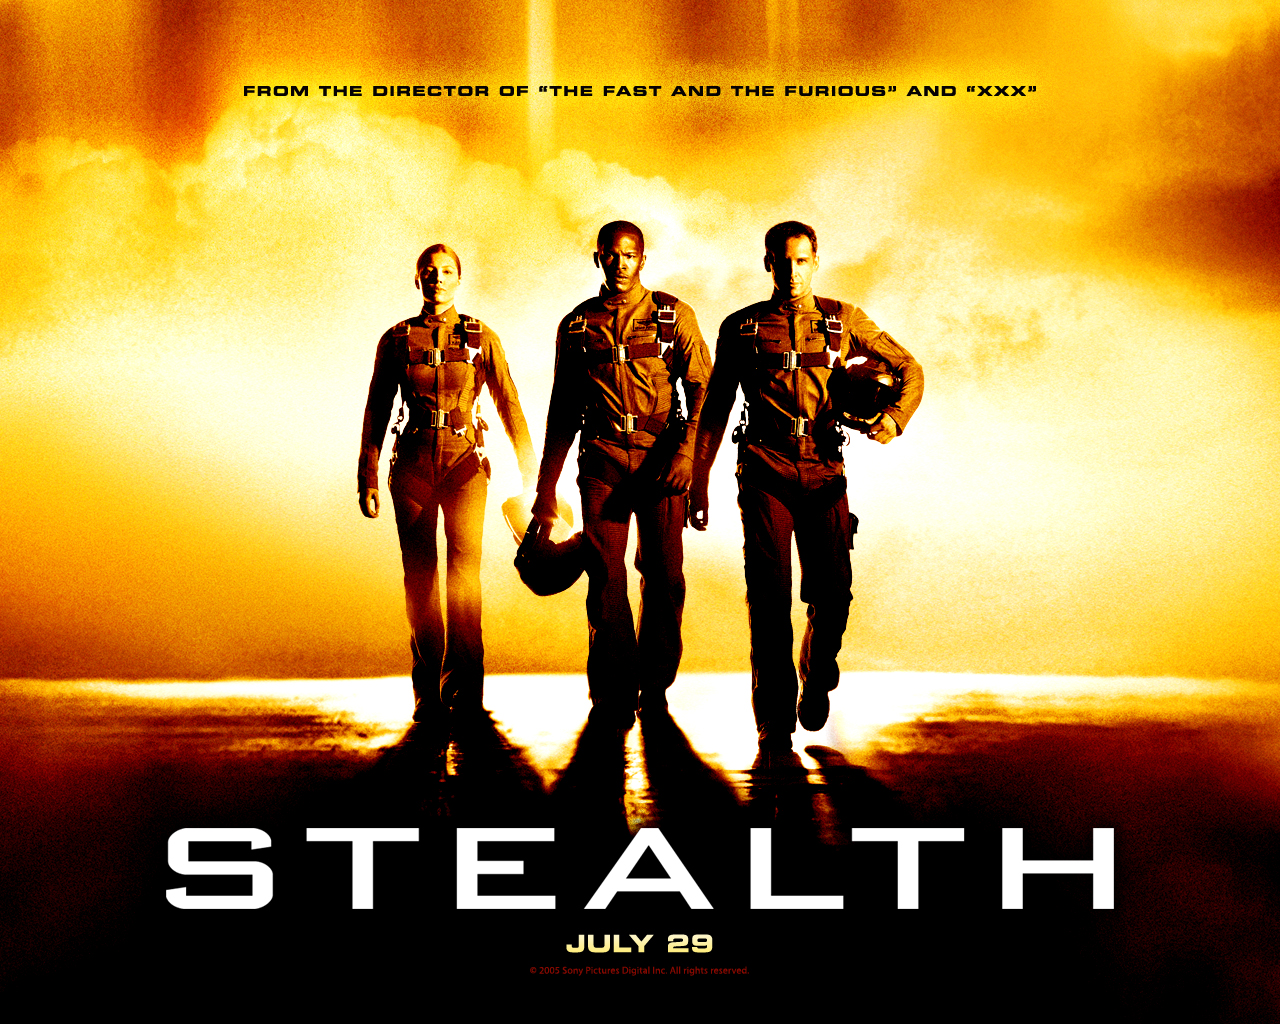 Stealth 2005 Movie Poster - HD Wallpaper 